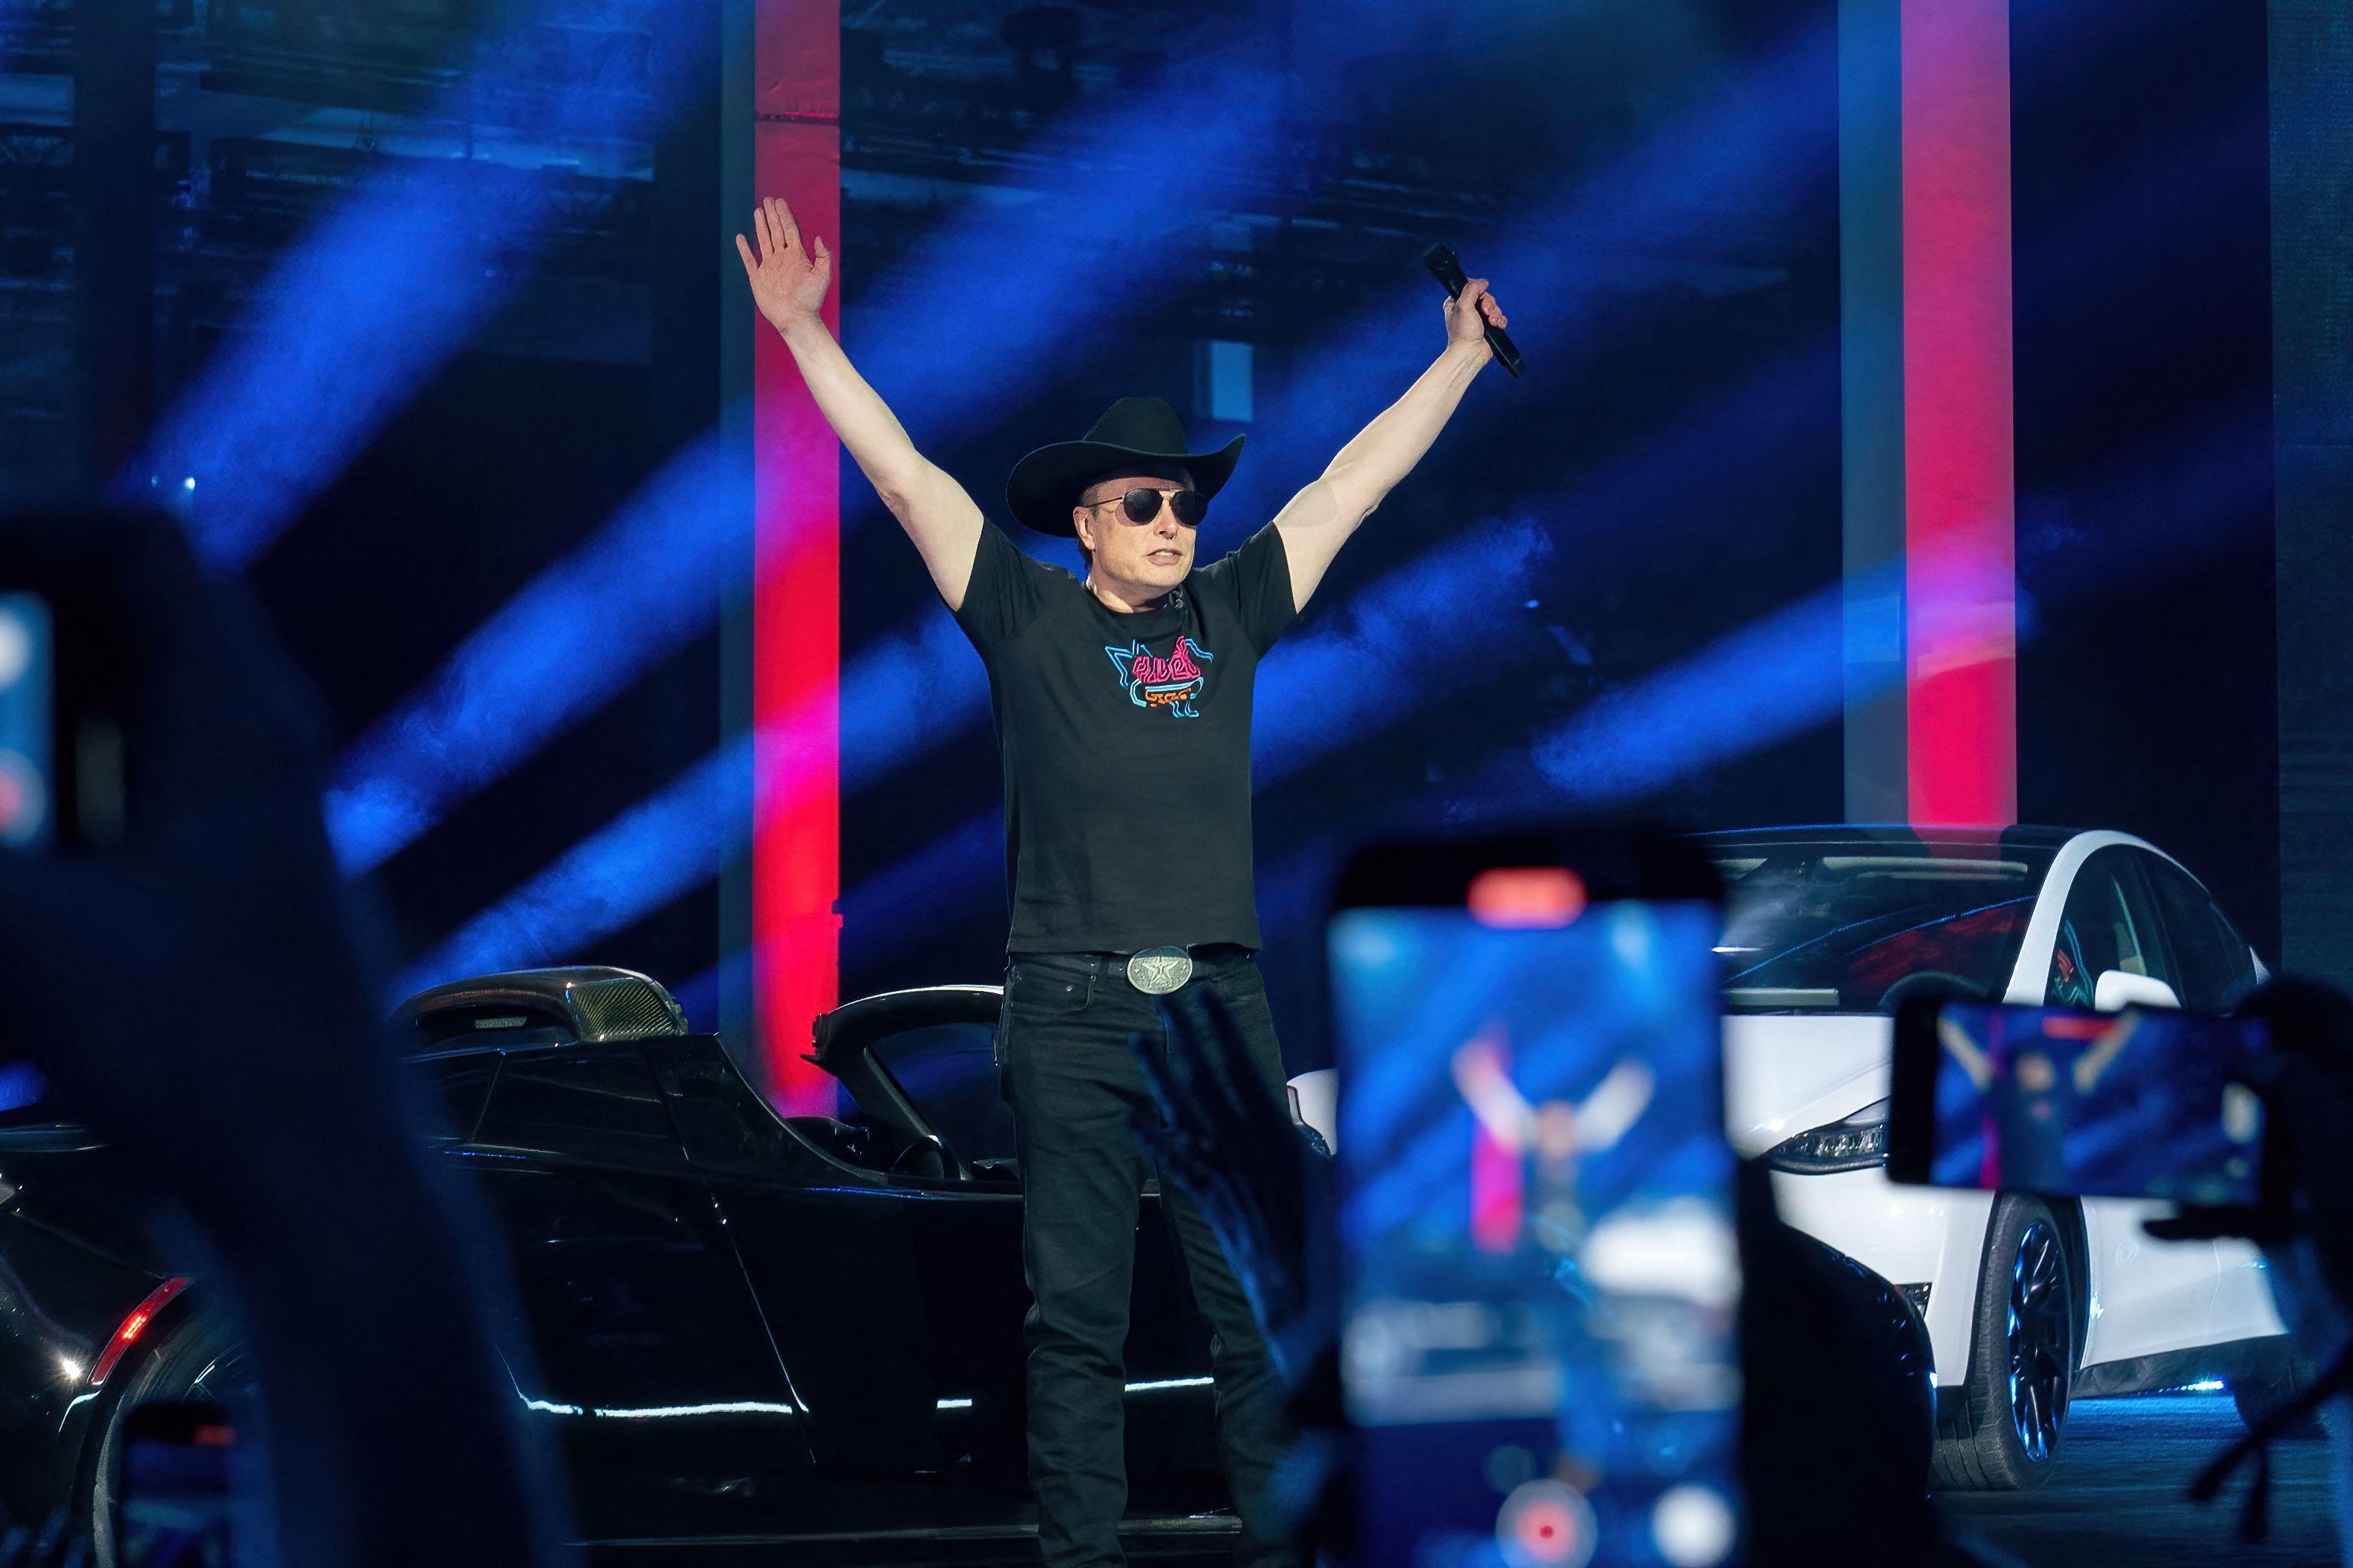 Elon Musk, wearing a cowboy hat, raises his arms up wide while standing on a stage in front of cars.